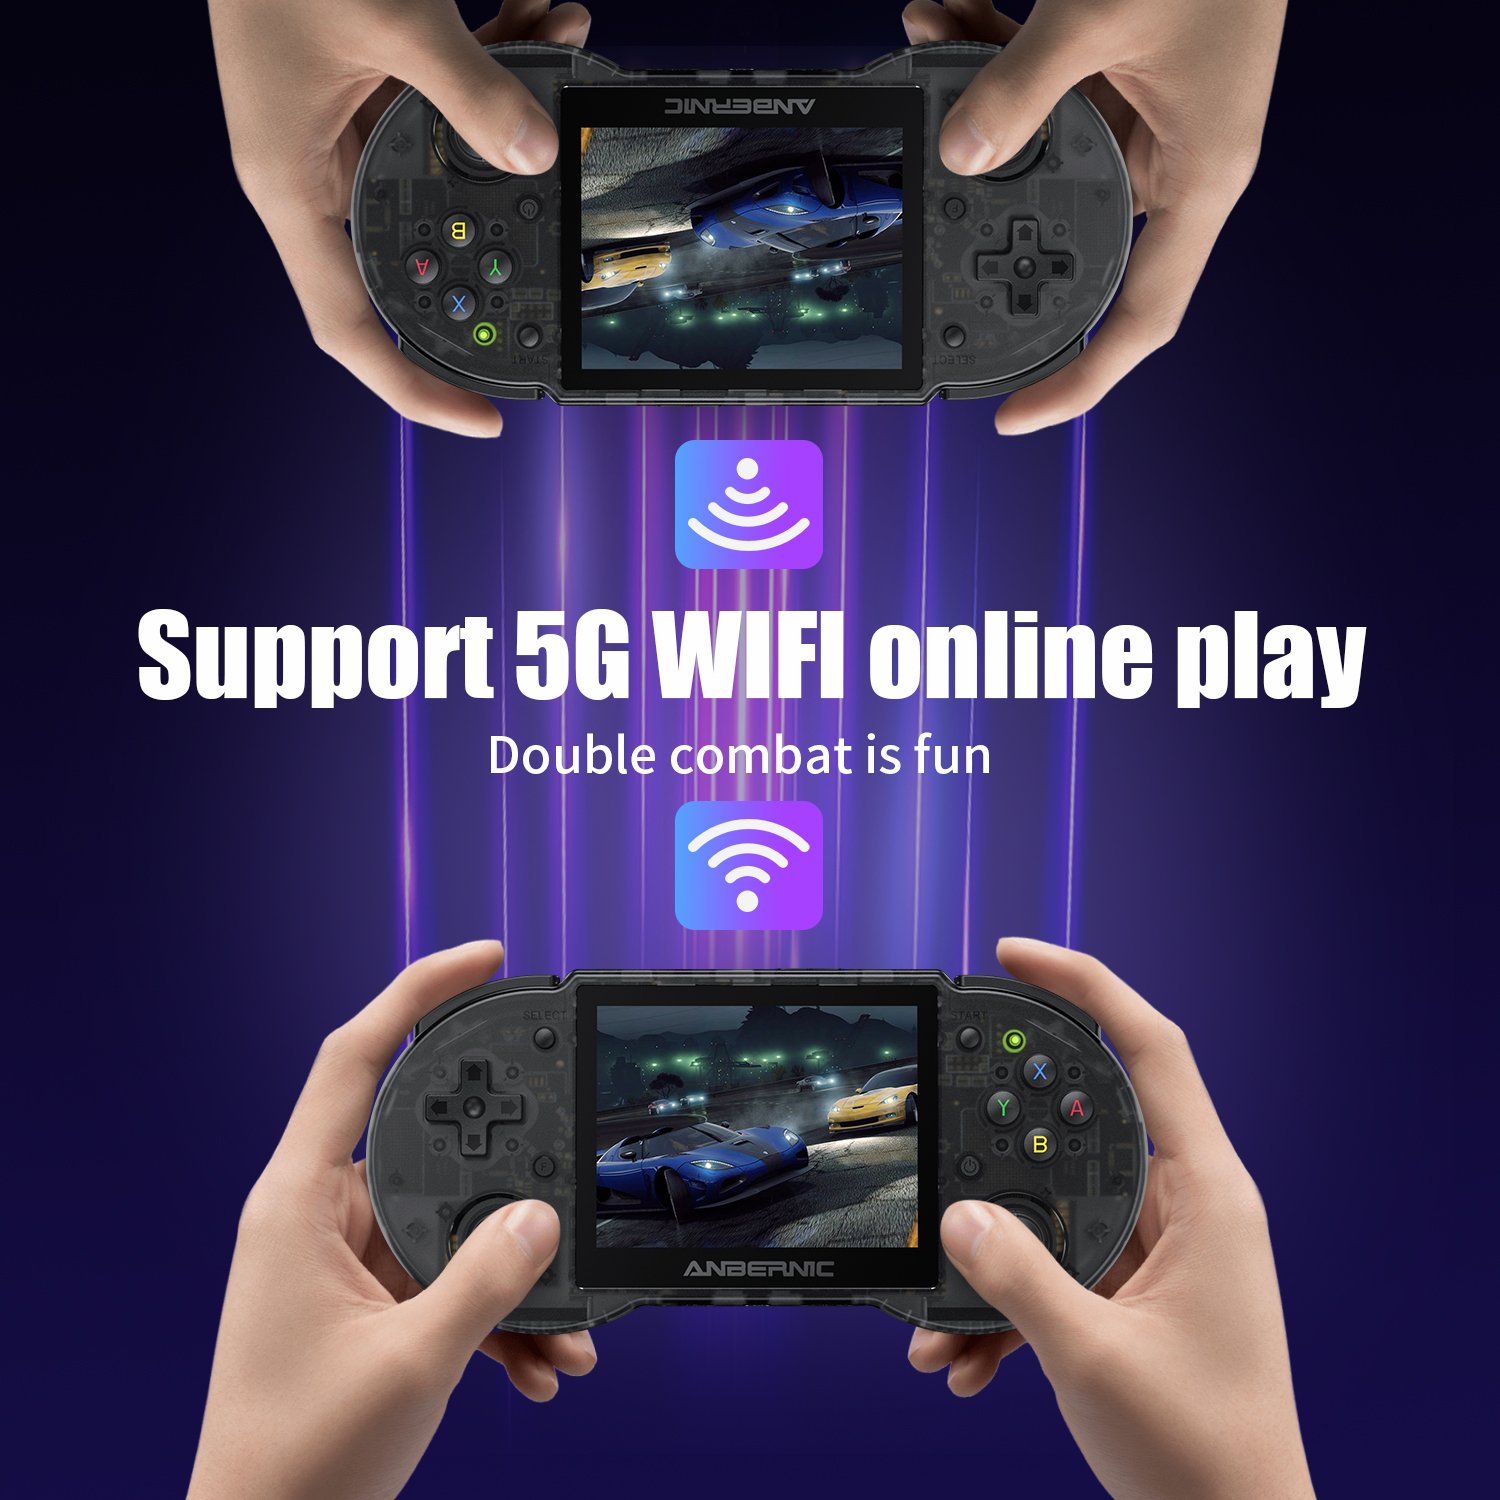 RG353P support 5g WIFI online play